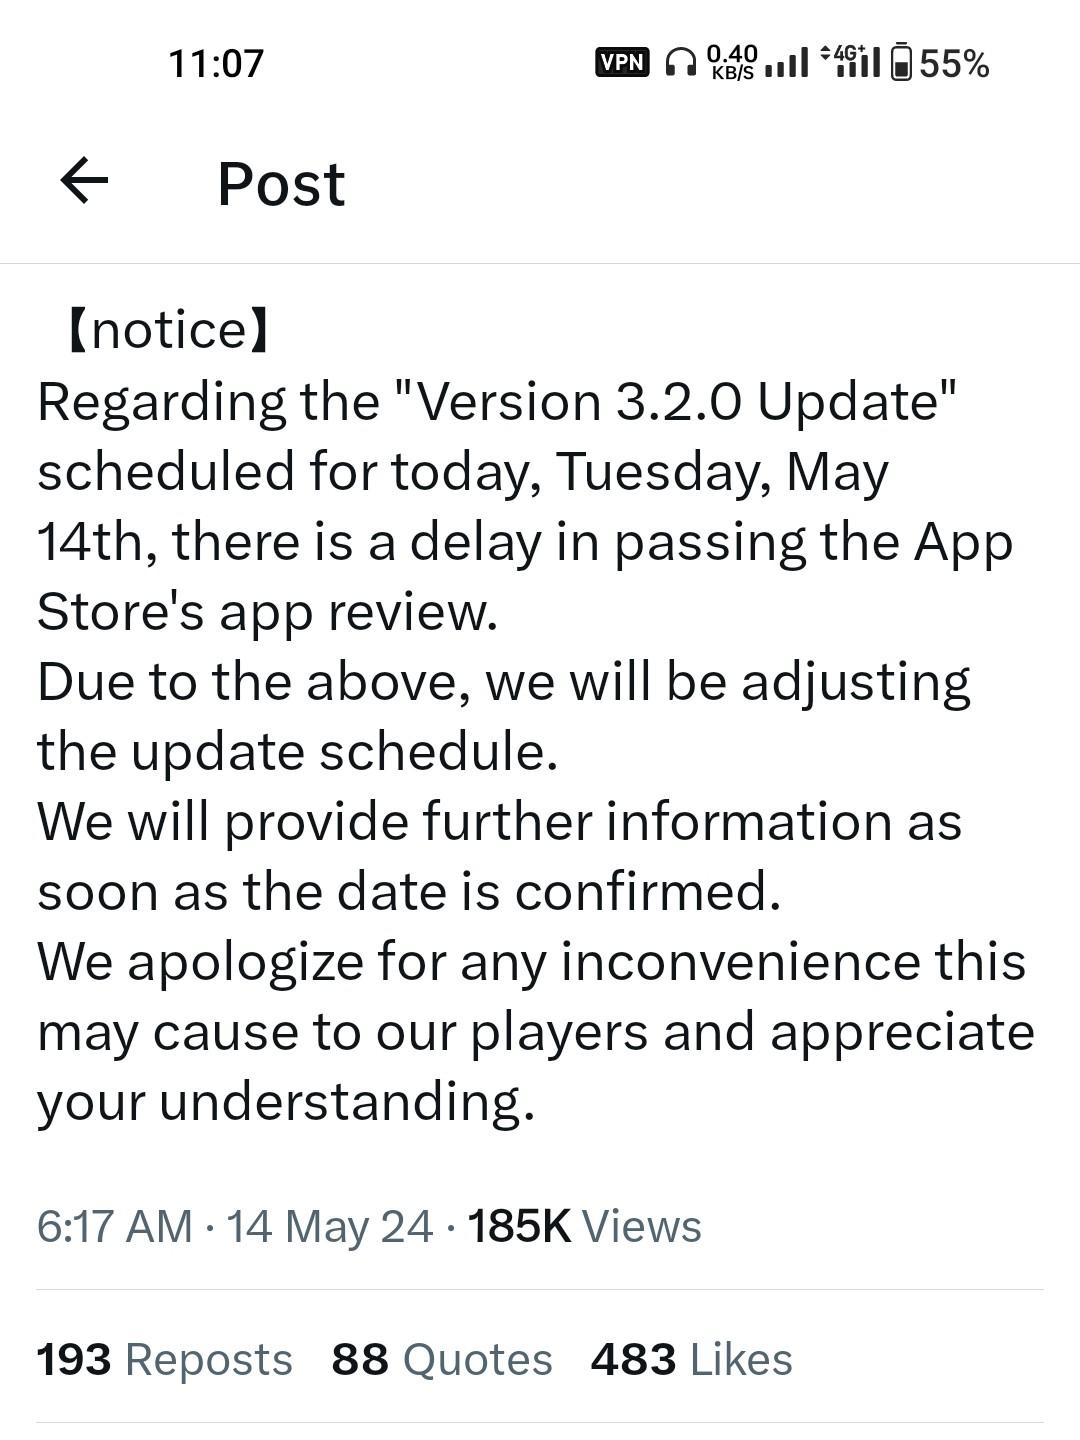 PUBG Mobile Officially Announcement About Kr 3.2 version Hope So Kal Aa Jaegi 